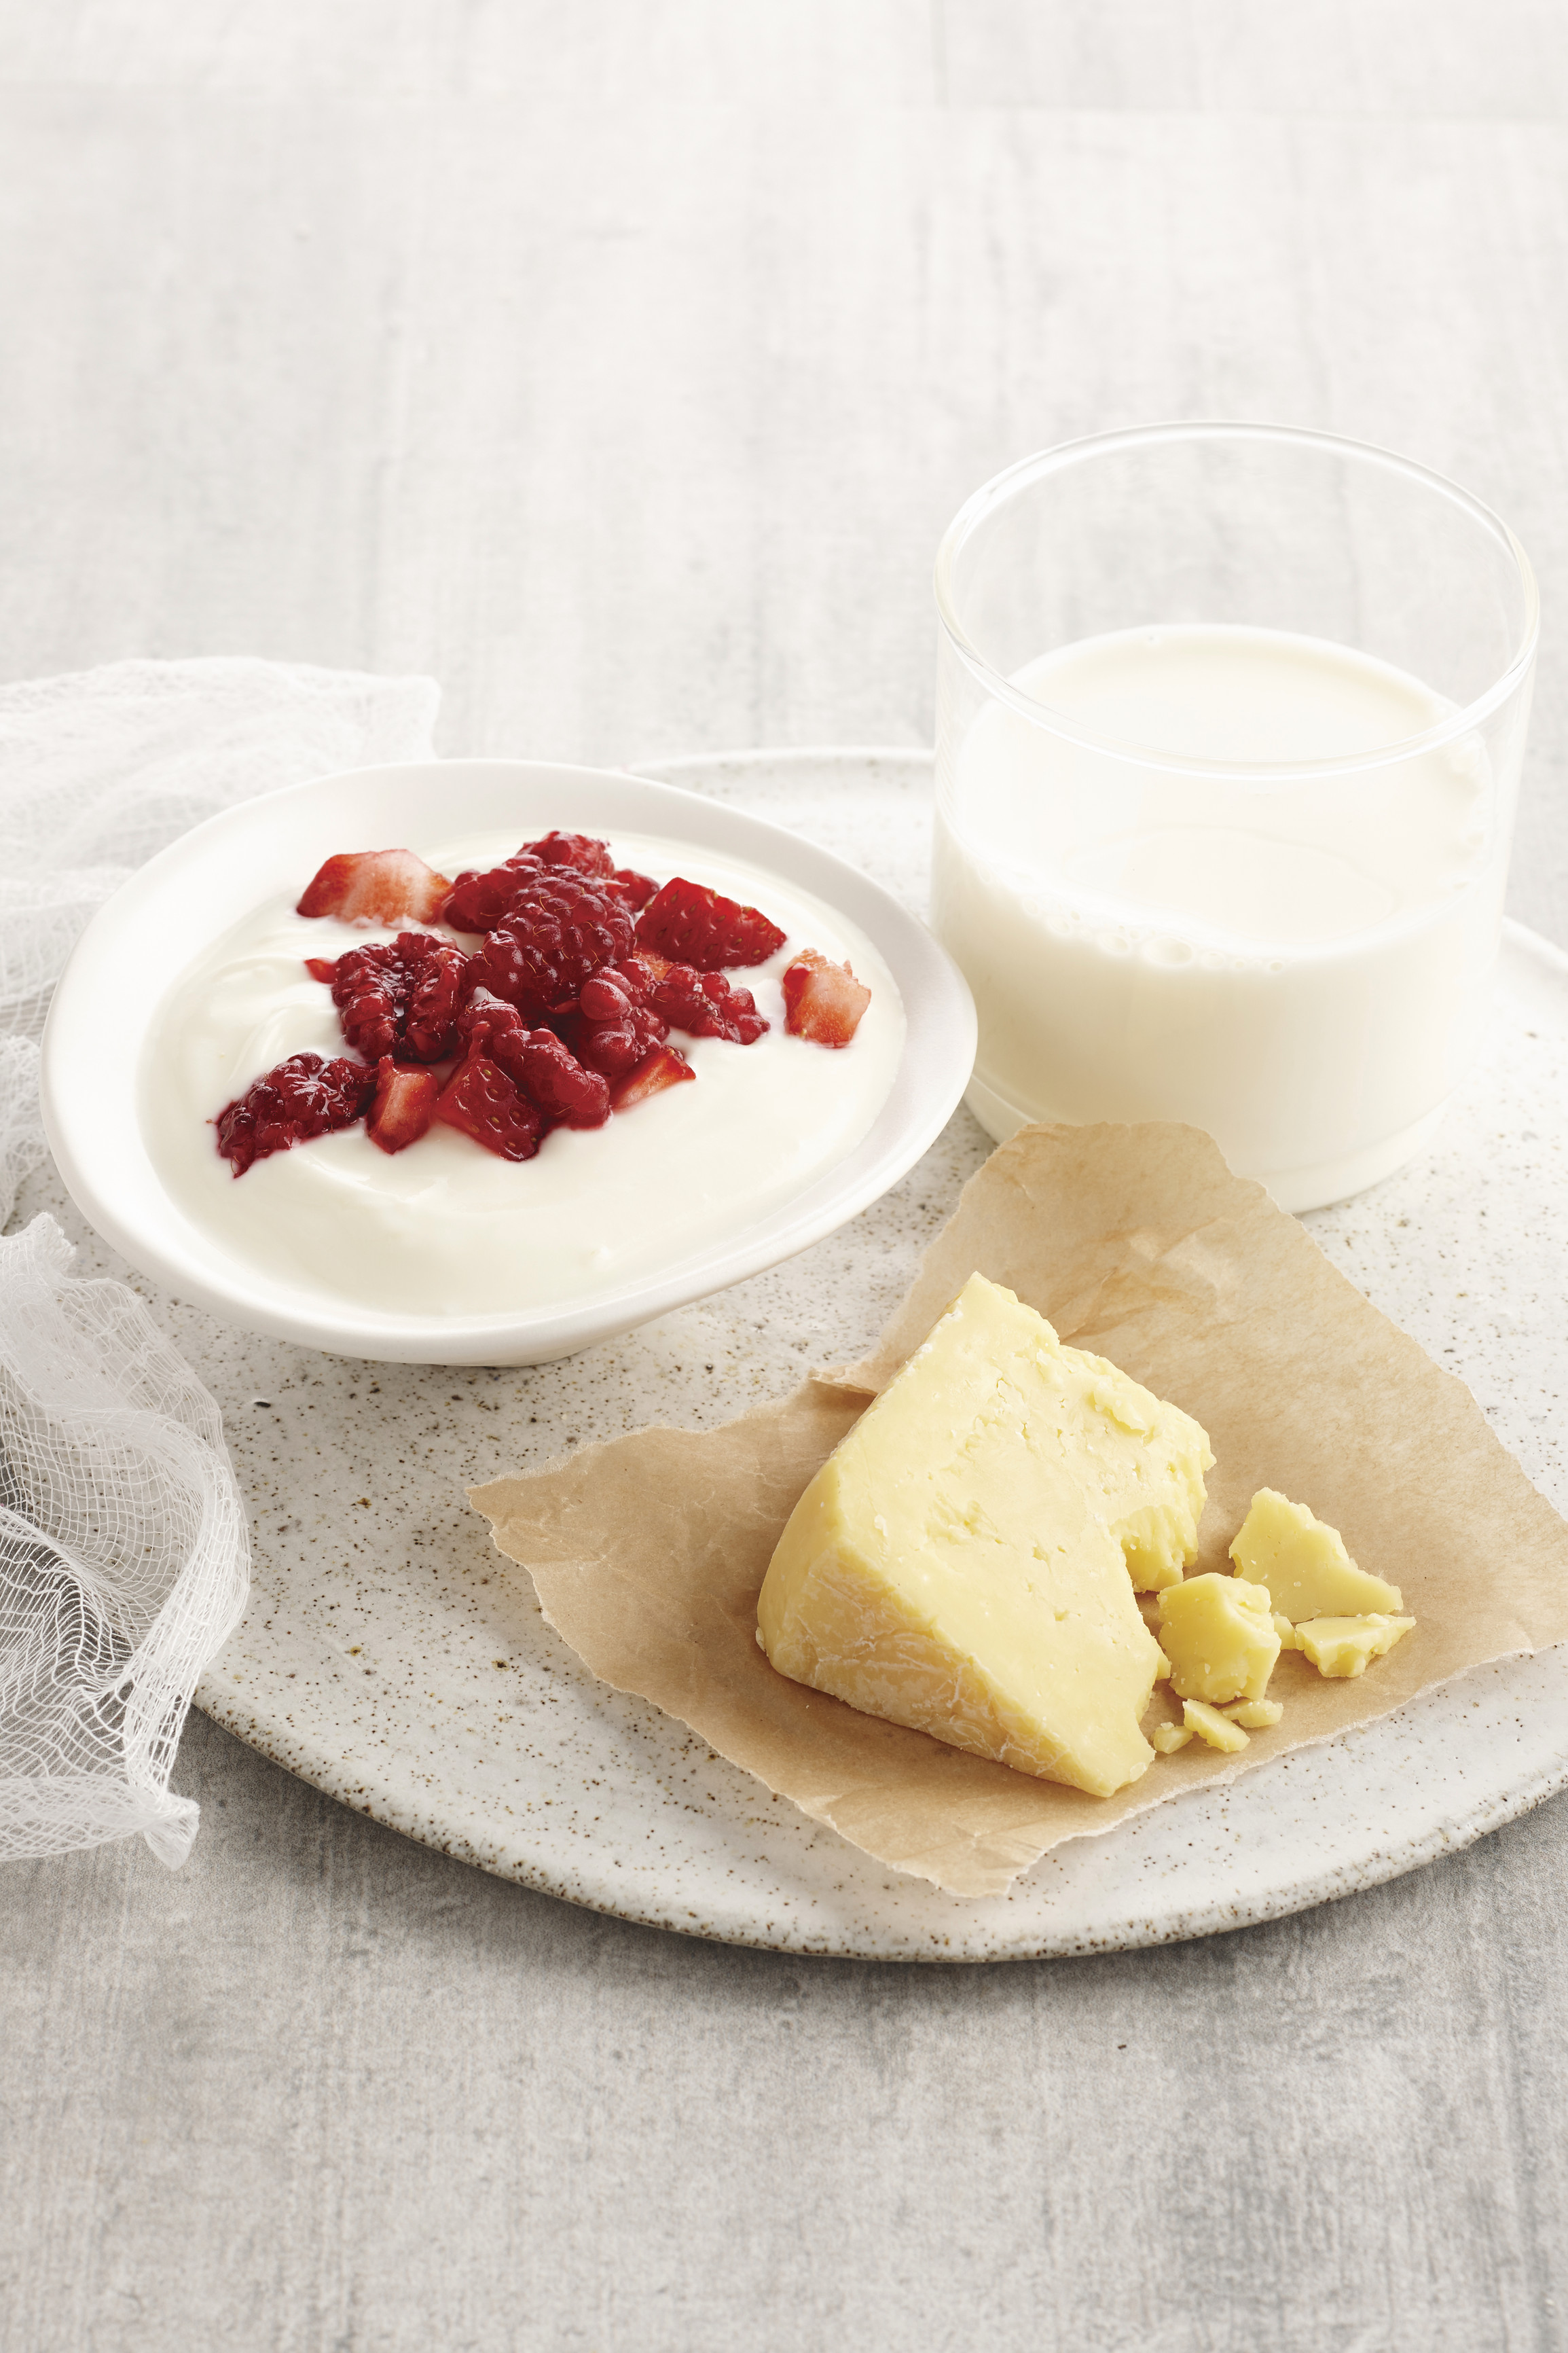 Wedge of cheese, glass of milk and bowl of yoghurt and berries